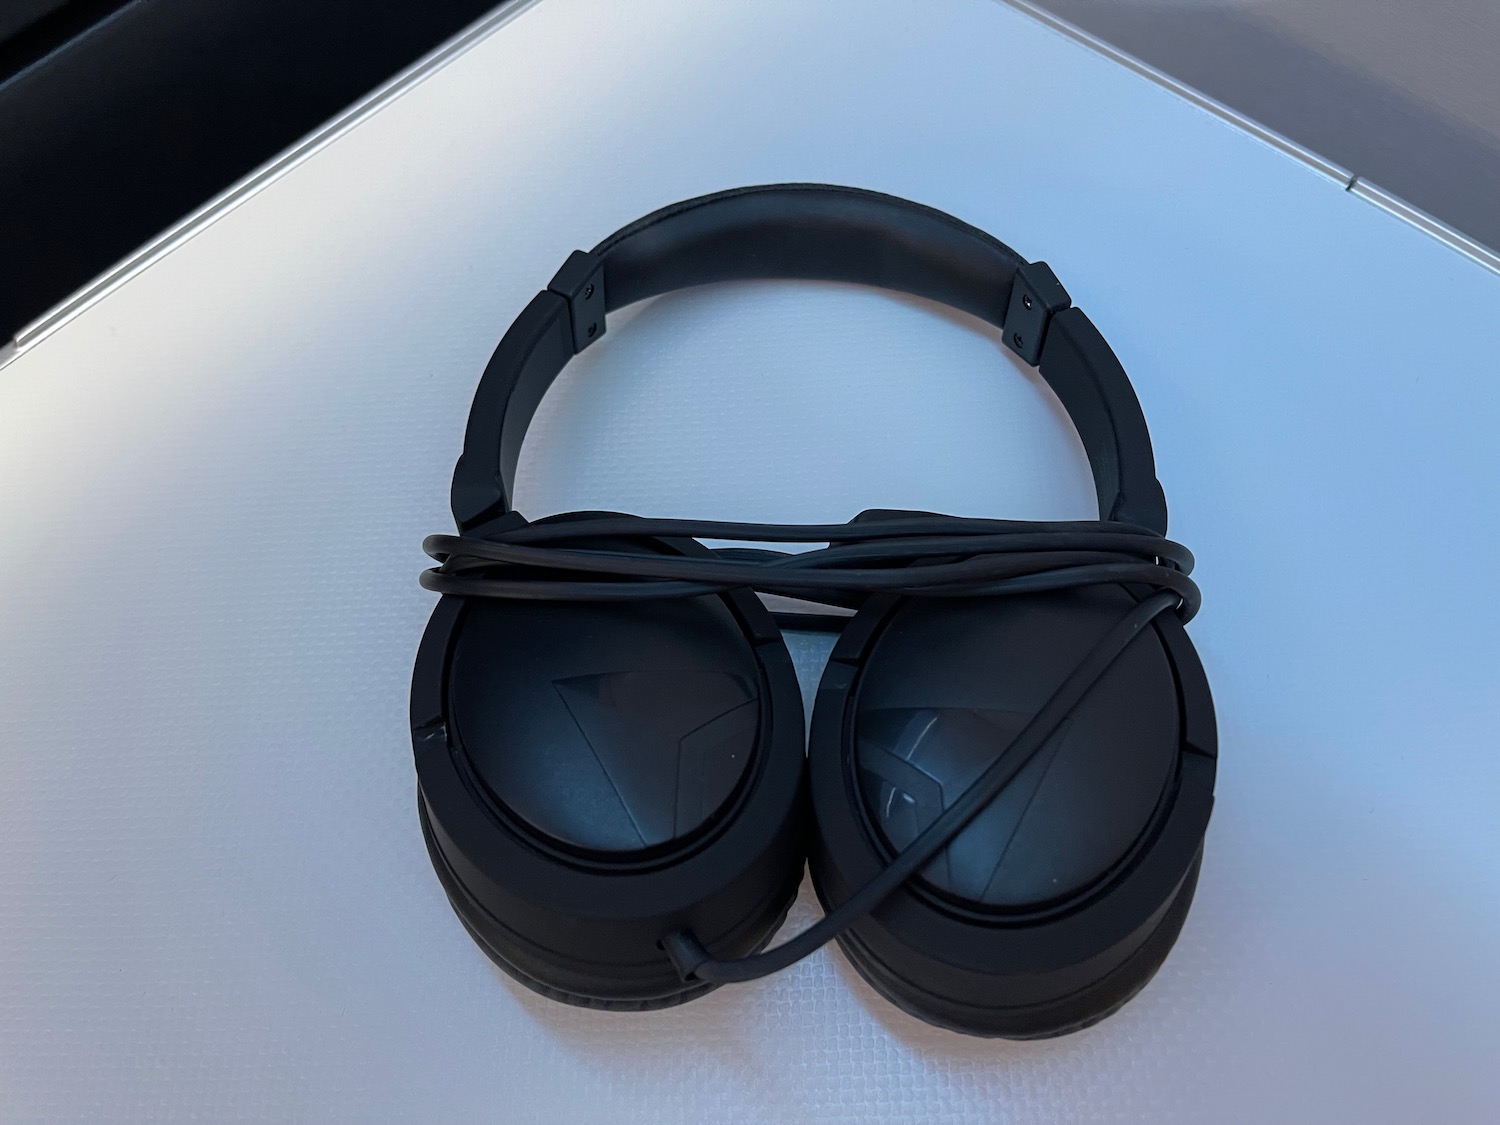 a pair of black headphones with a wire